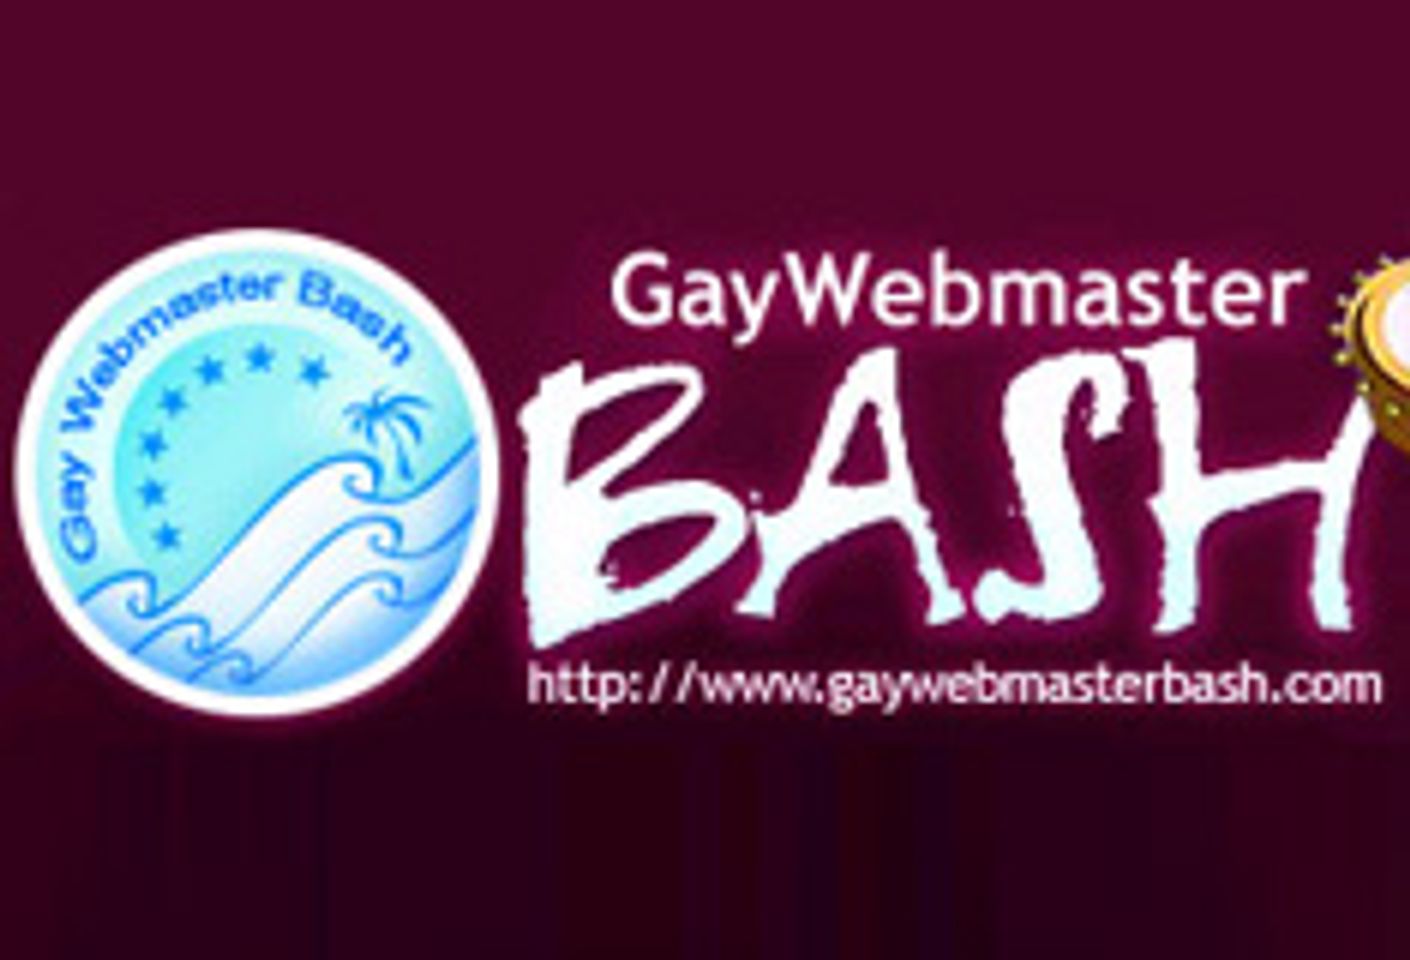 Gay Webmaster Bash Parties Announced for Internext